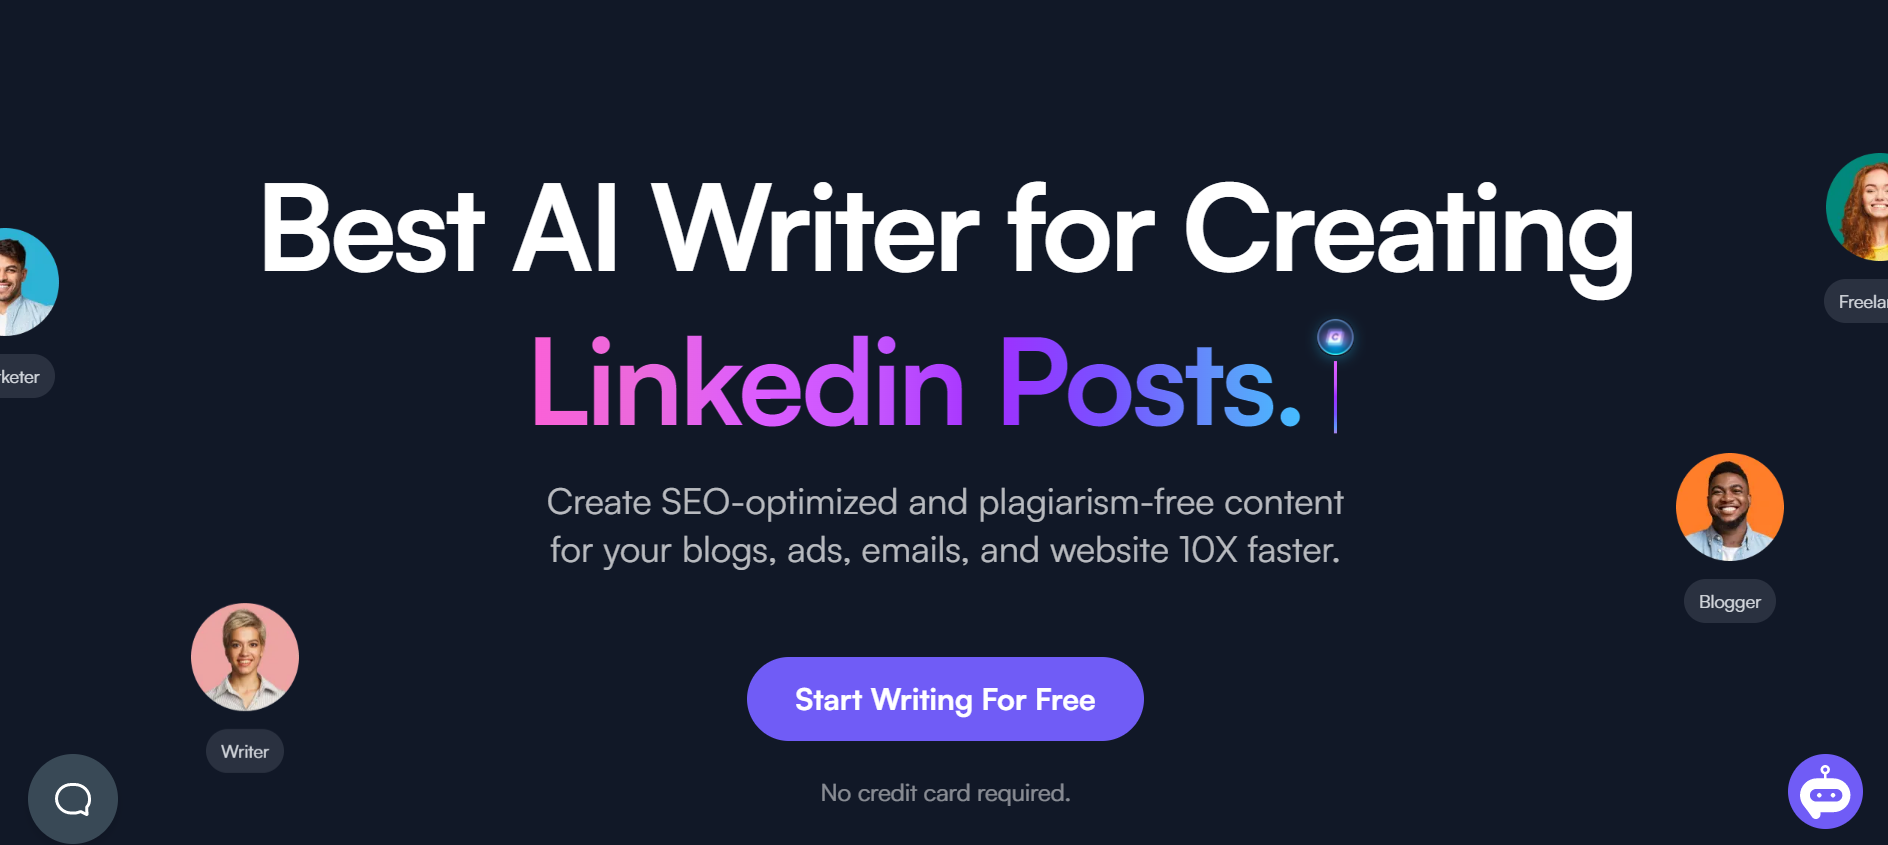 Writesonic Landing Page - Best AI Writer for Creating Linkedin Posts